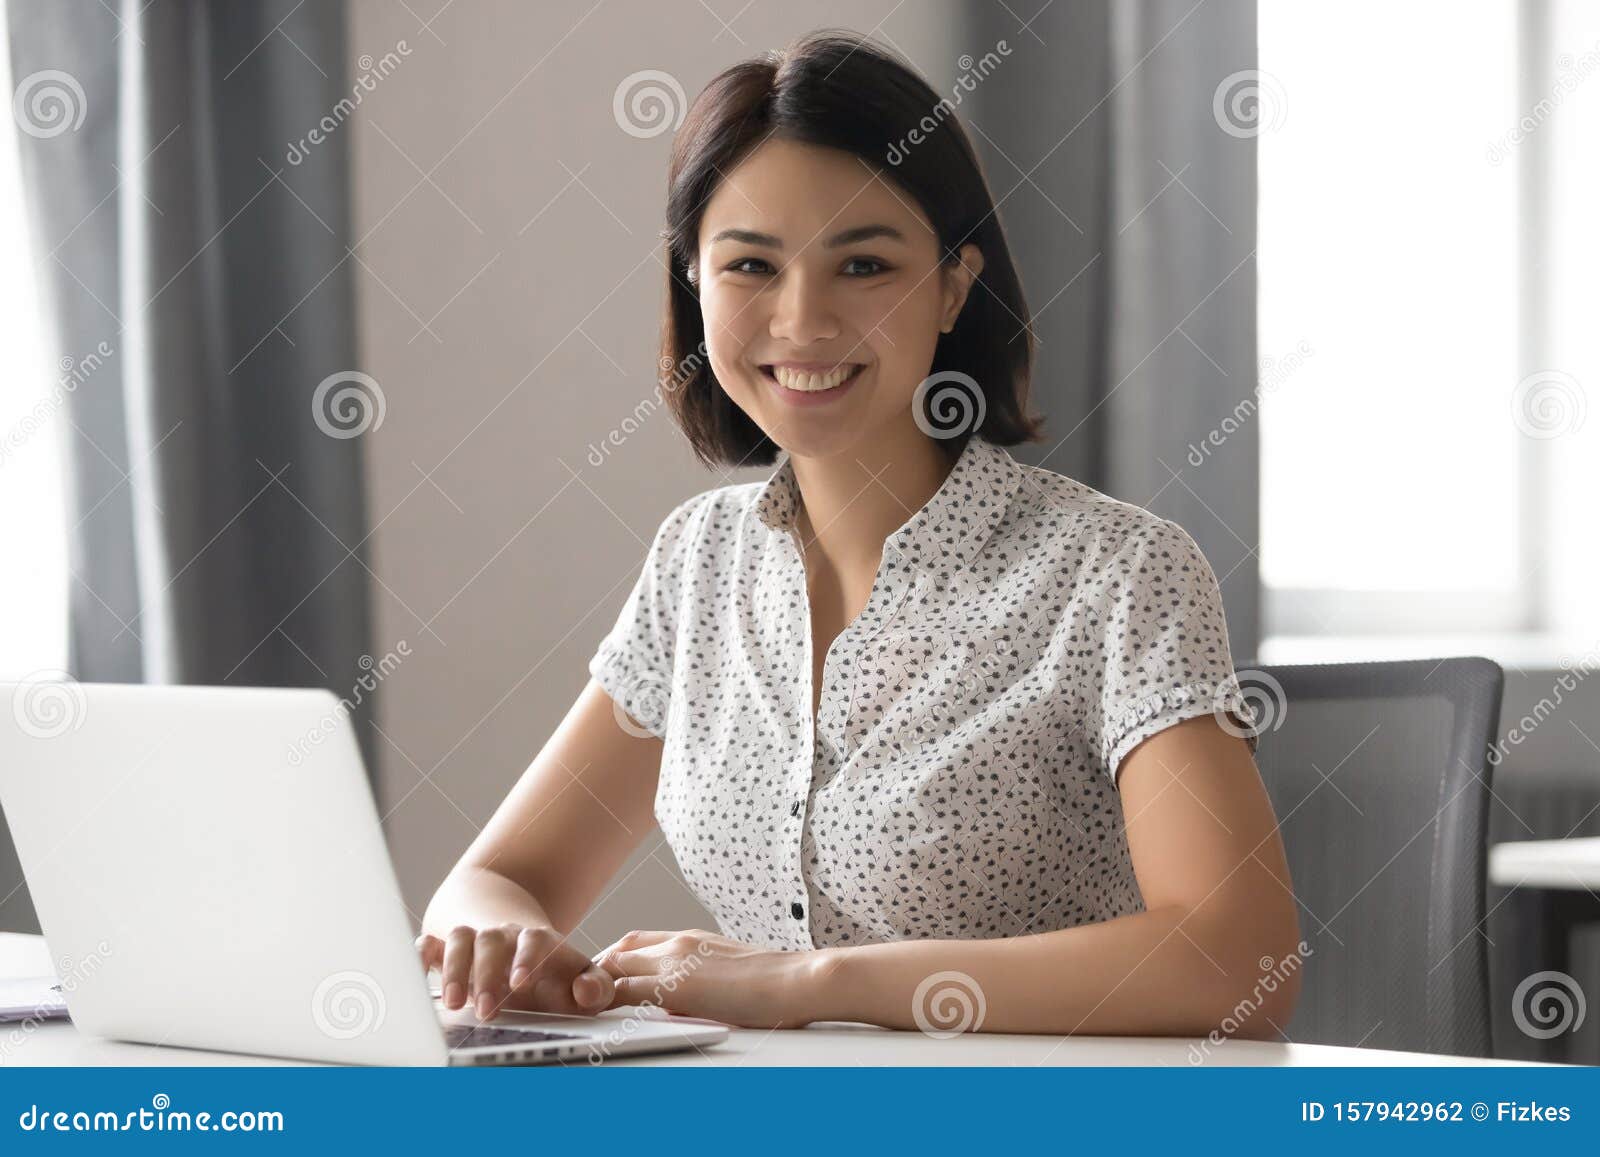 happy motivated asian female employee working with computer portrait.